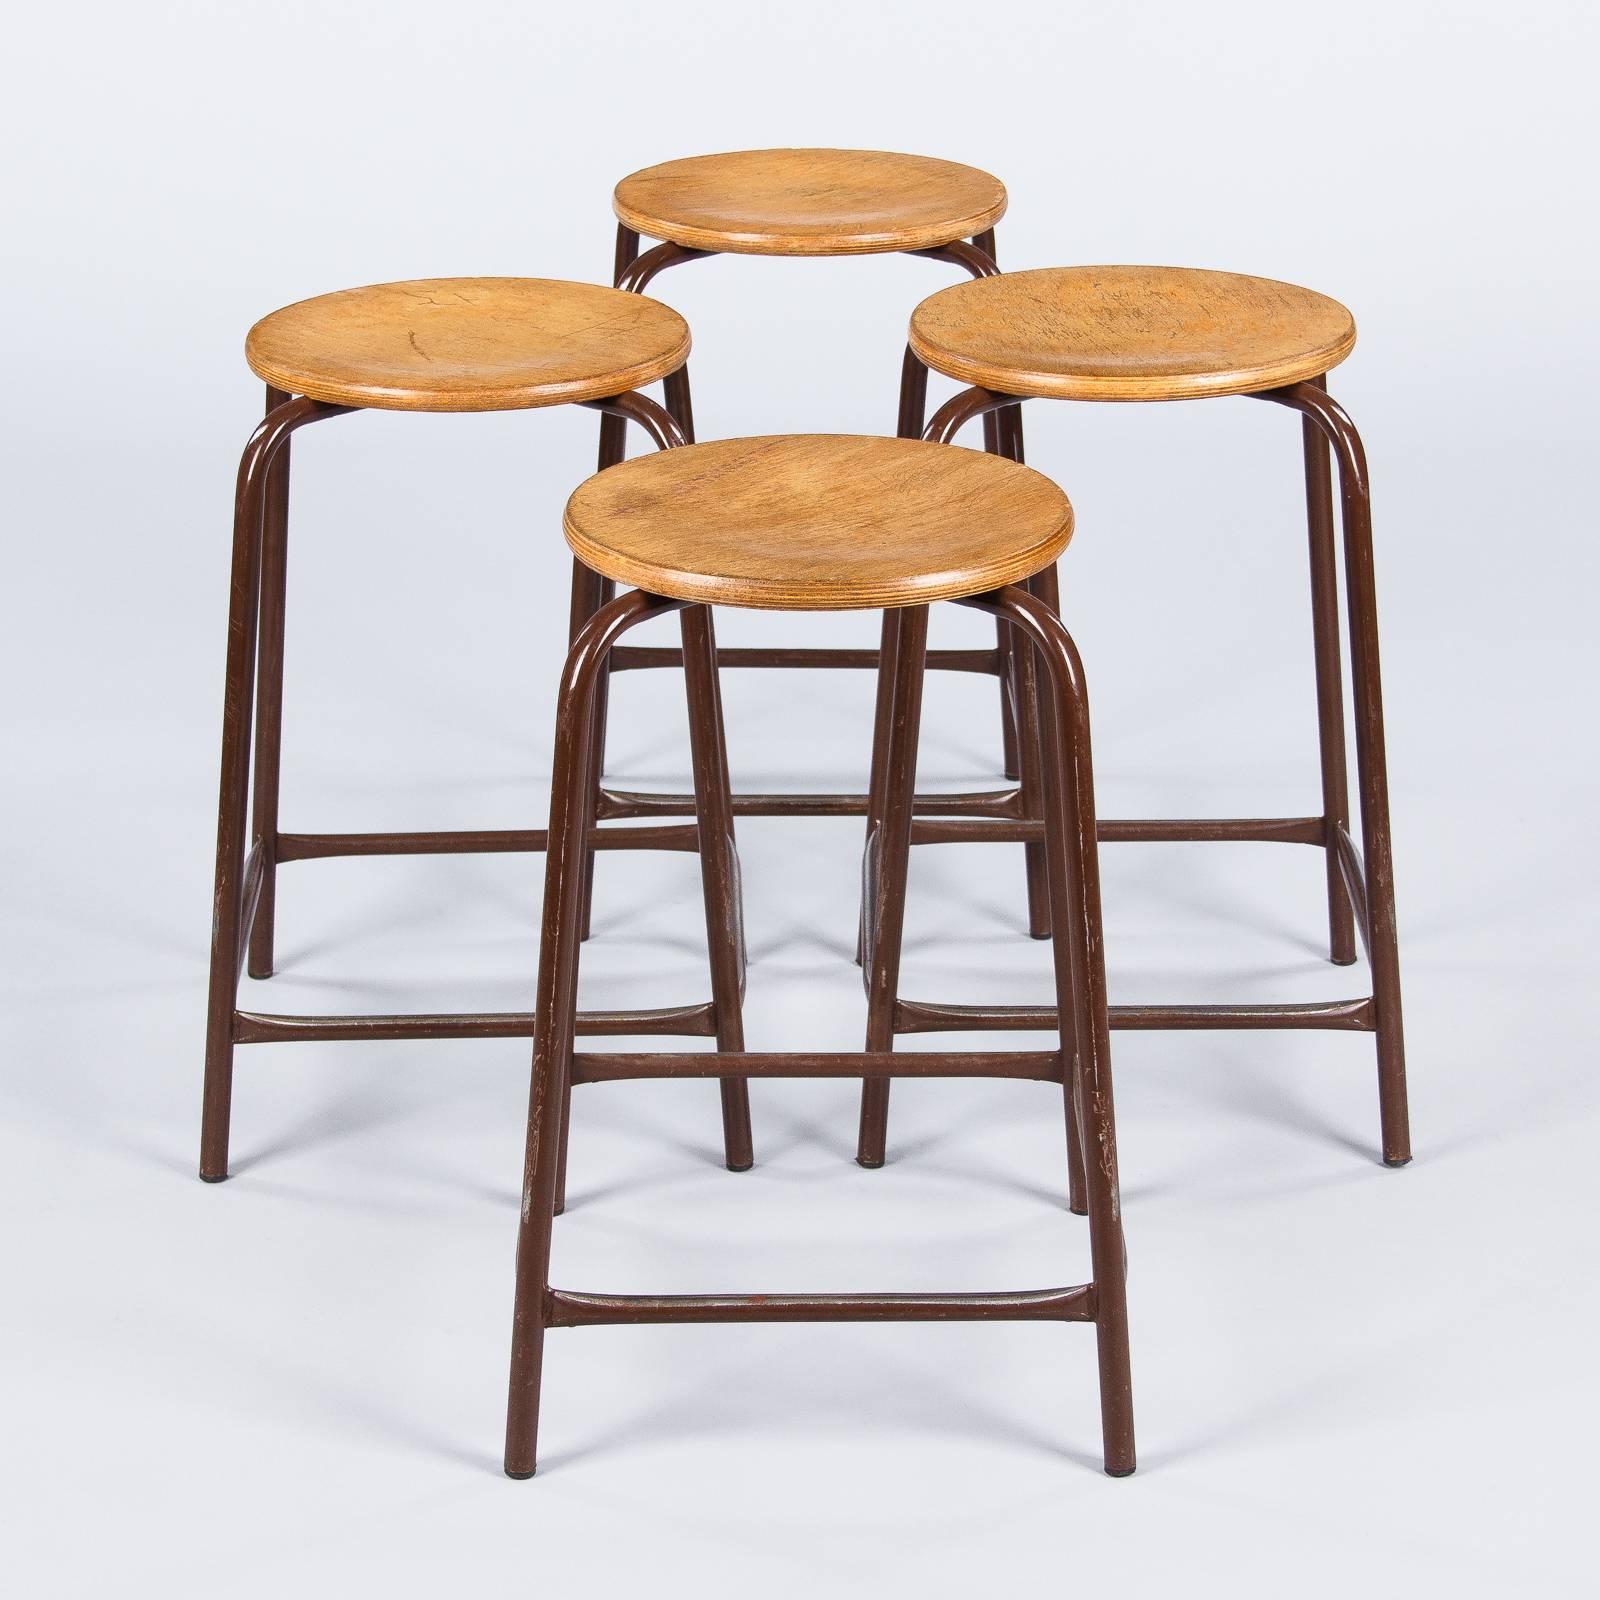 A set of four Mid-Century Industrial stools that were used in schools. The stools are stackable. They are made of tubular metal painted brown with pine seats. The seats are 12.5